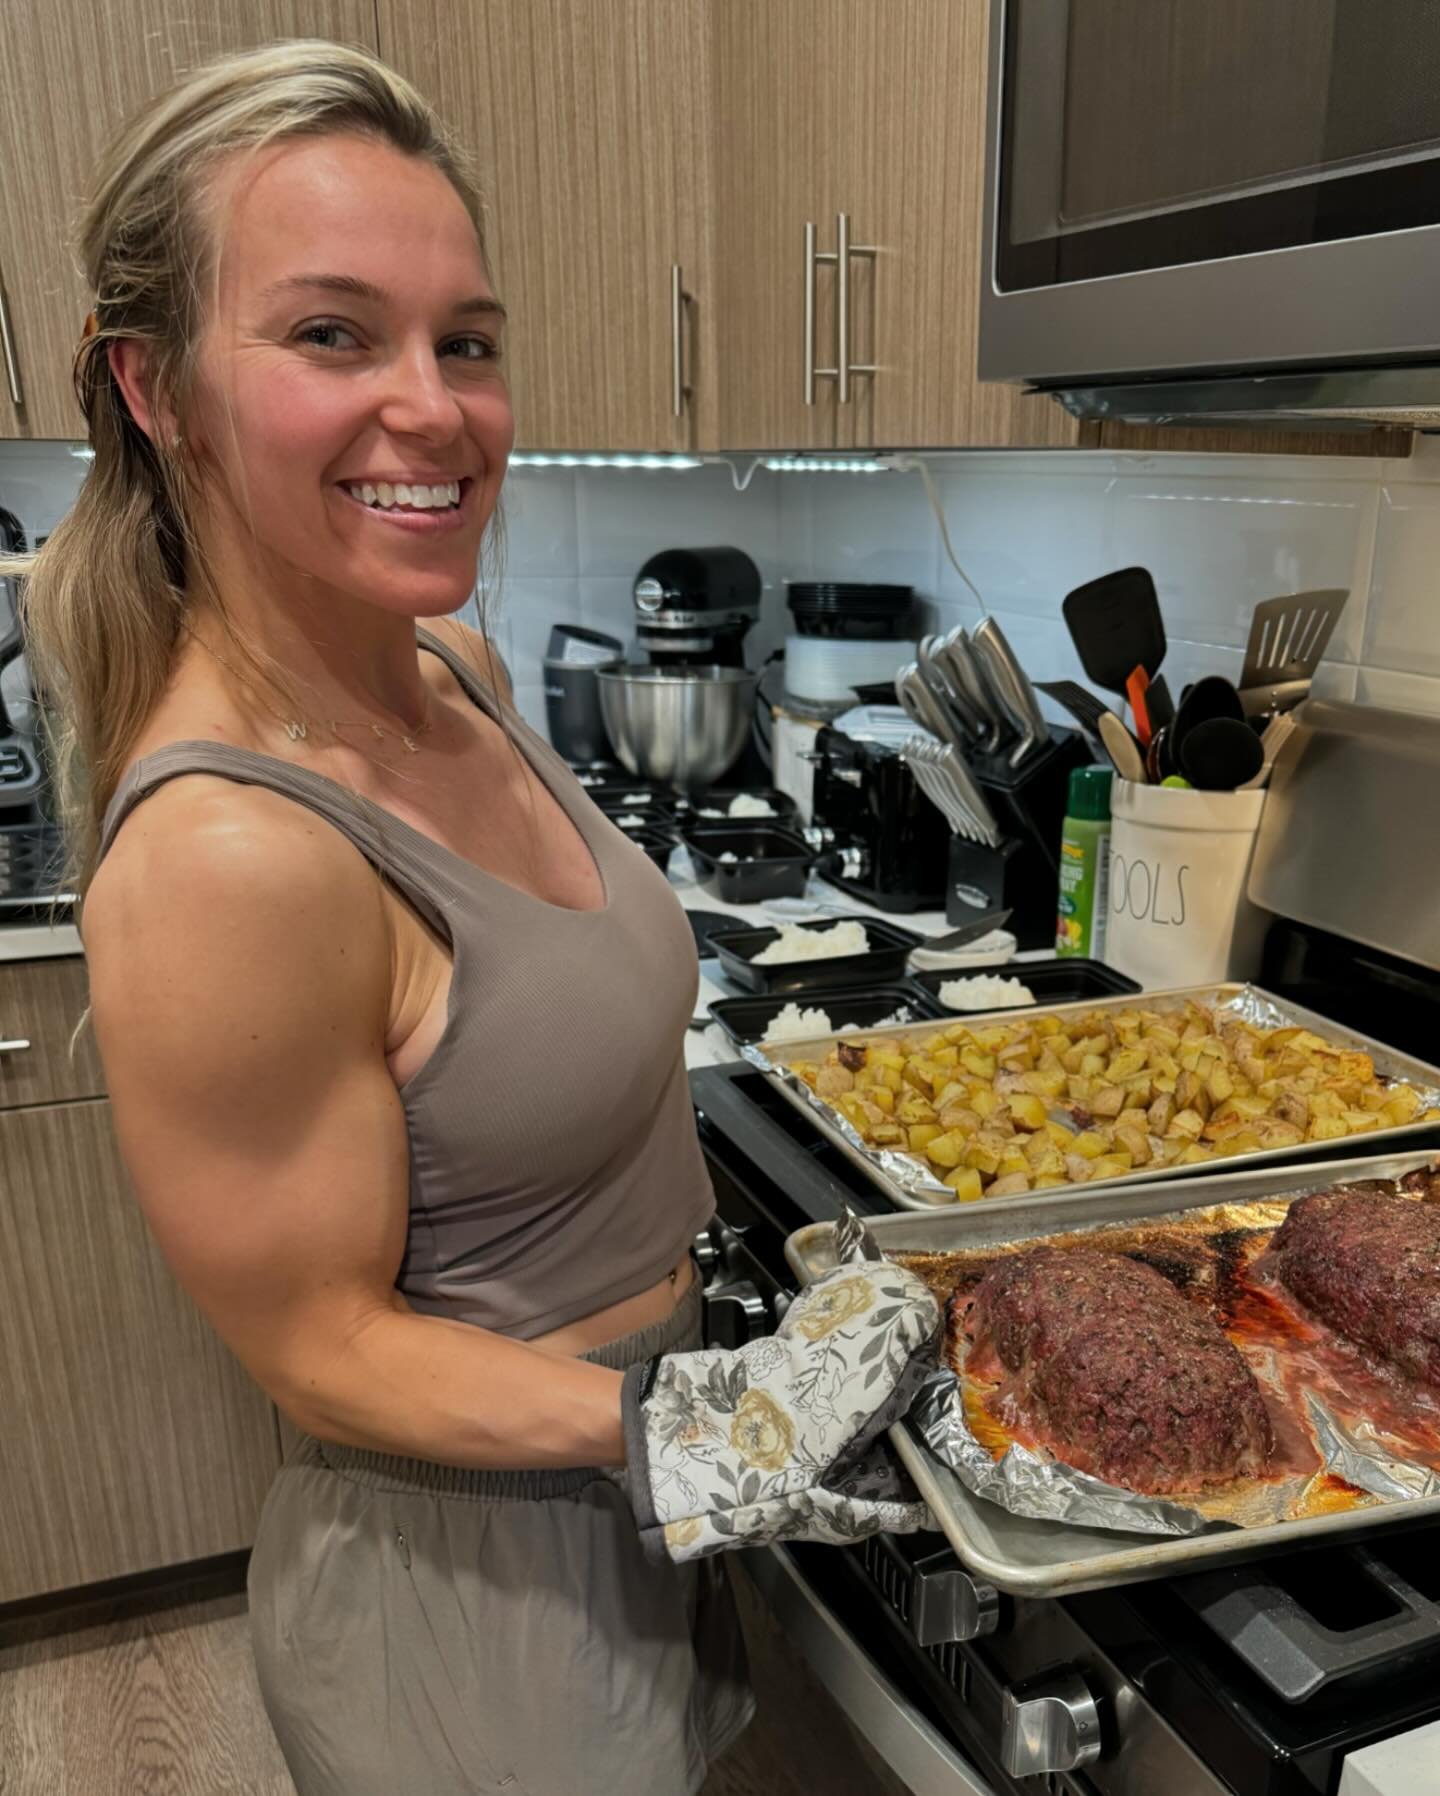 Muscles are made in the kitchen🤩
Did you know we are breaking down our muscle tissue during our workouts? Whereas the food we feed our bodies helps us repair &amp; restore those broken down muscle tissues in order to recover, rebuild and get stronge